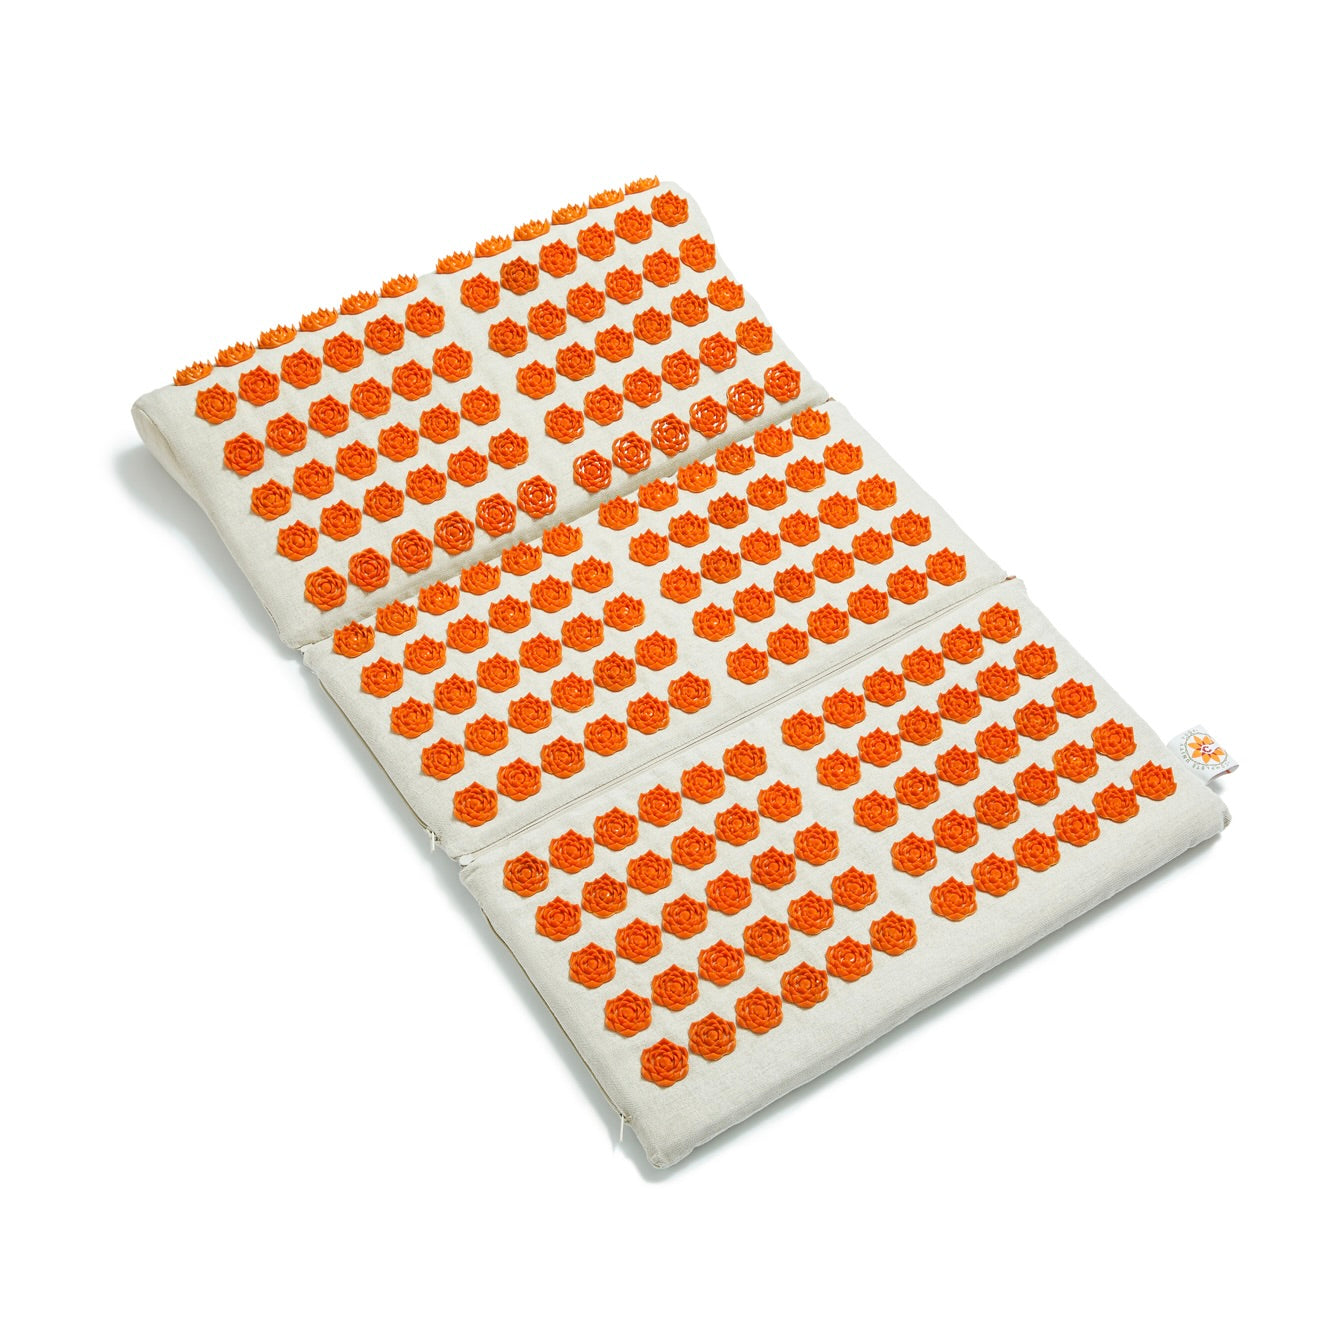 RelaxFast Acupressure Mat - Angle View - Complete Unity Yoga